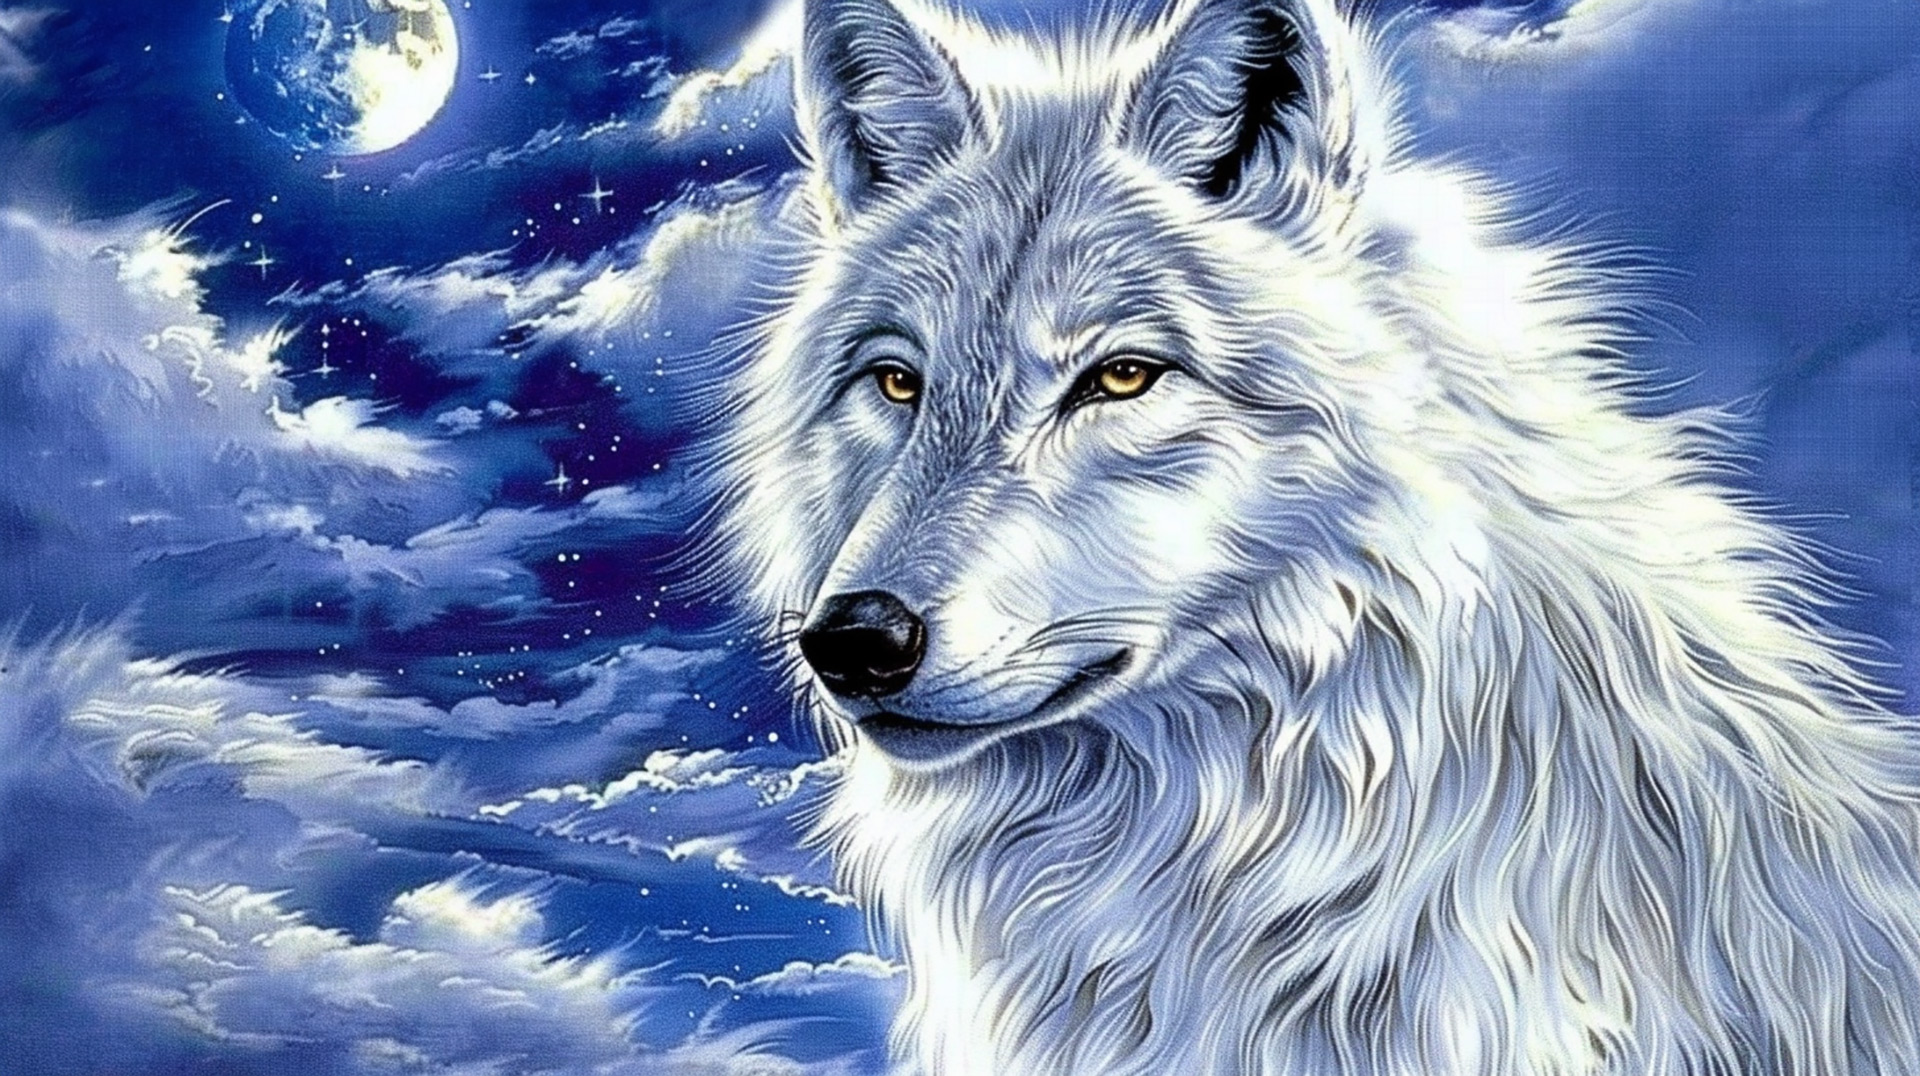 Enchanted Blue Wolf and Moon Digital Image